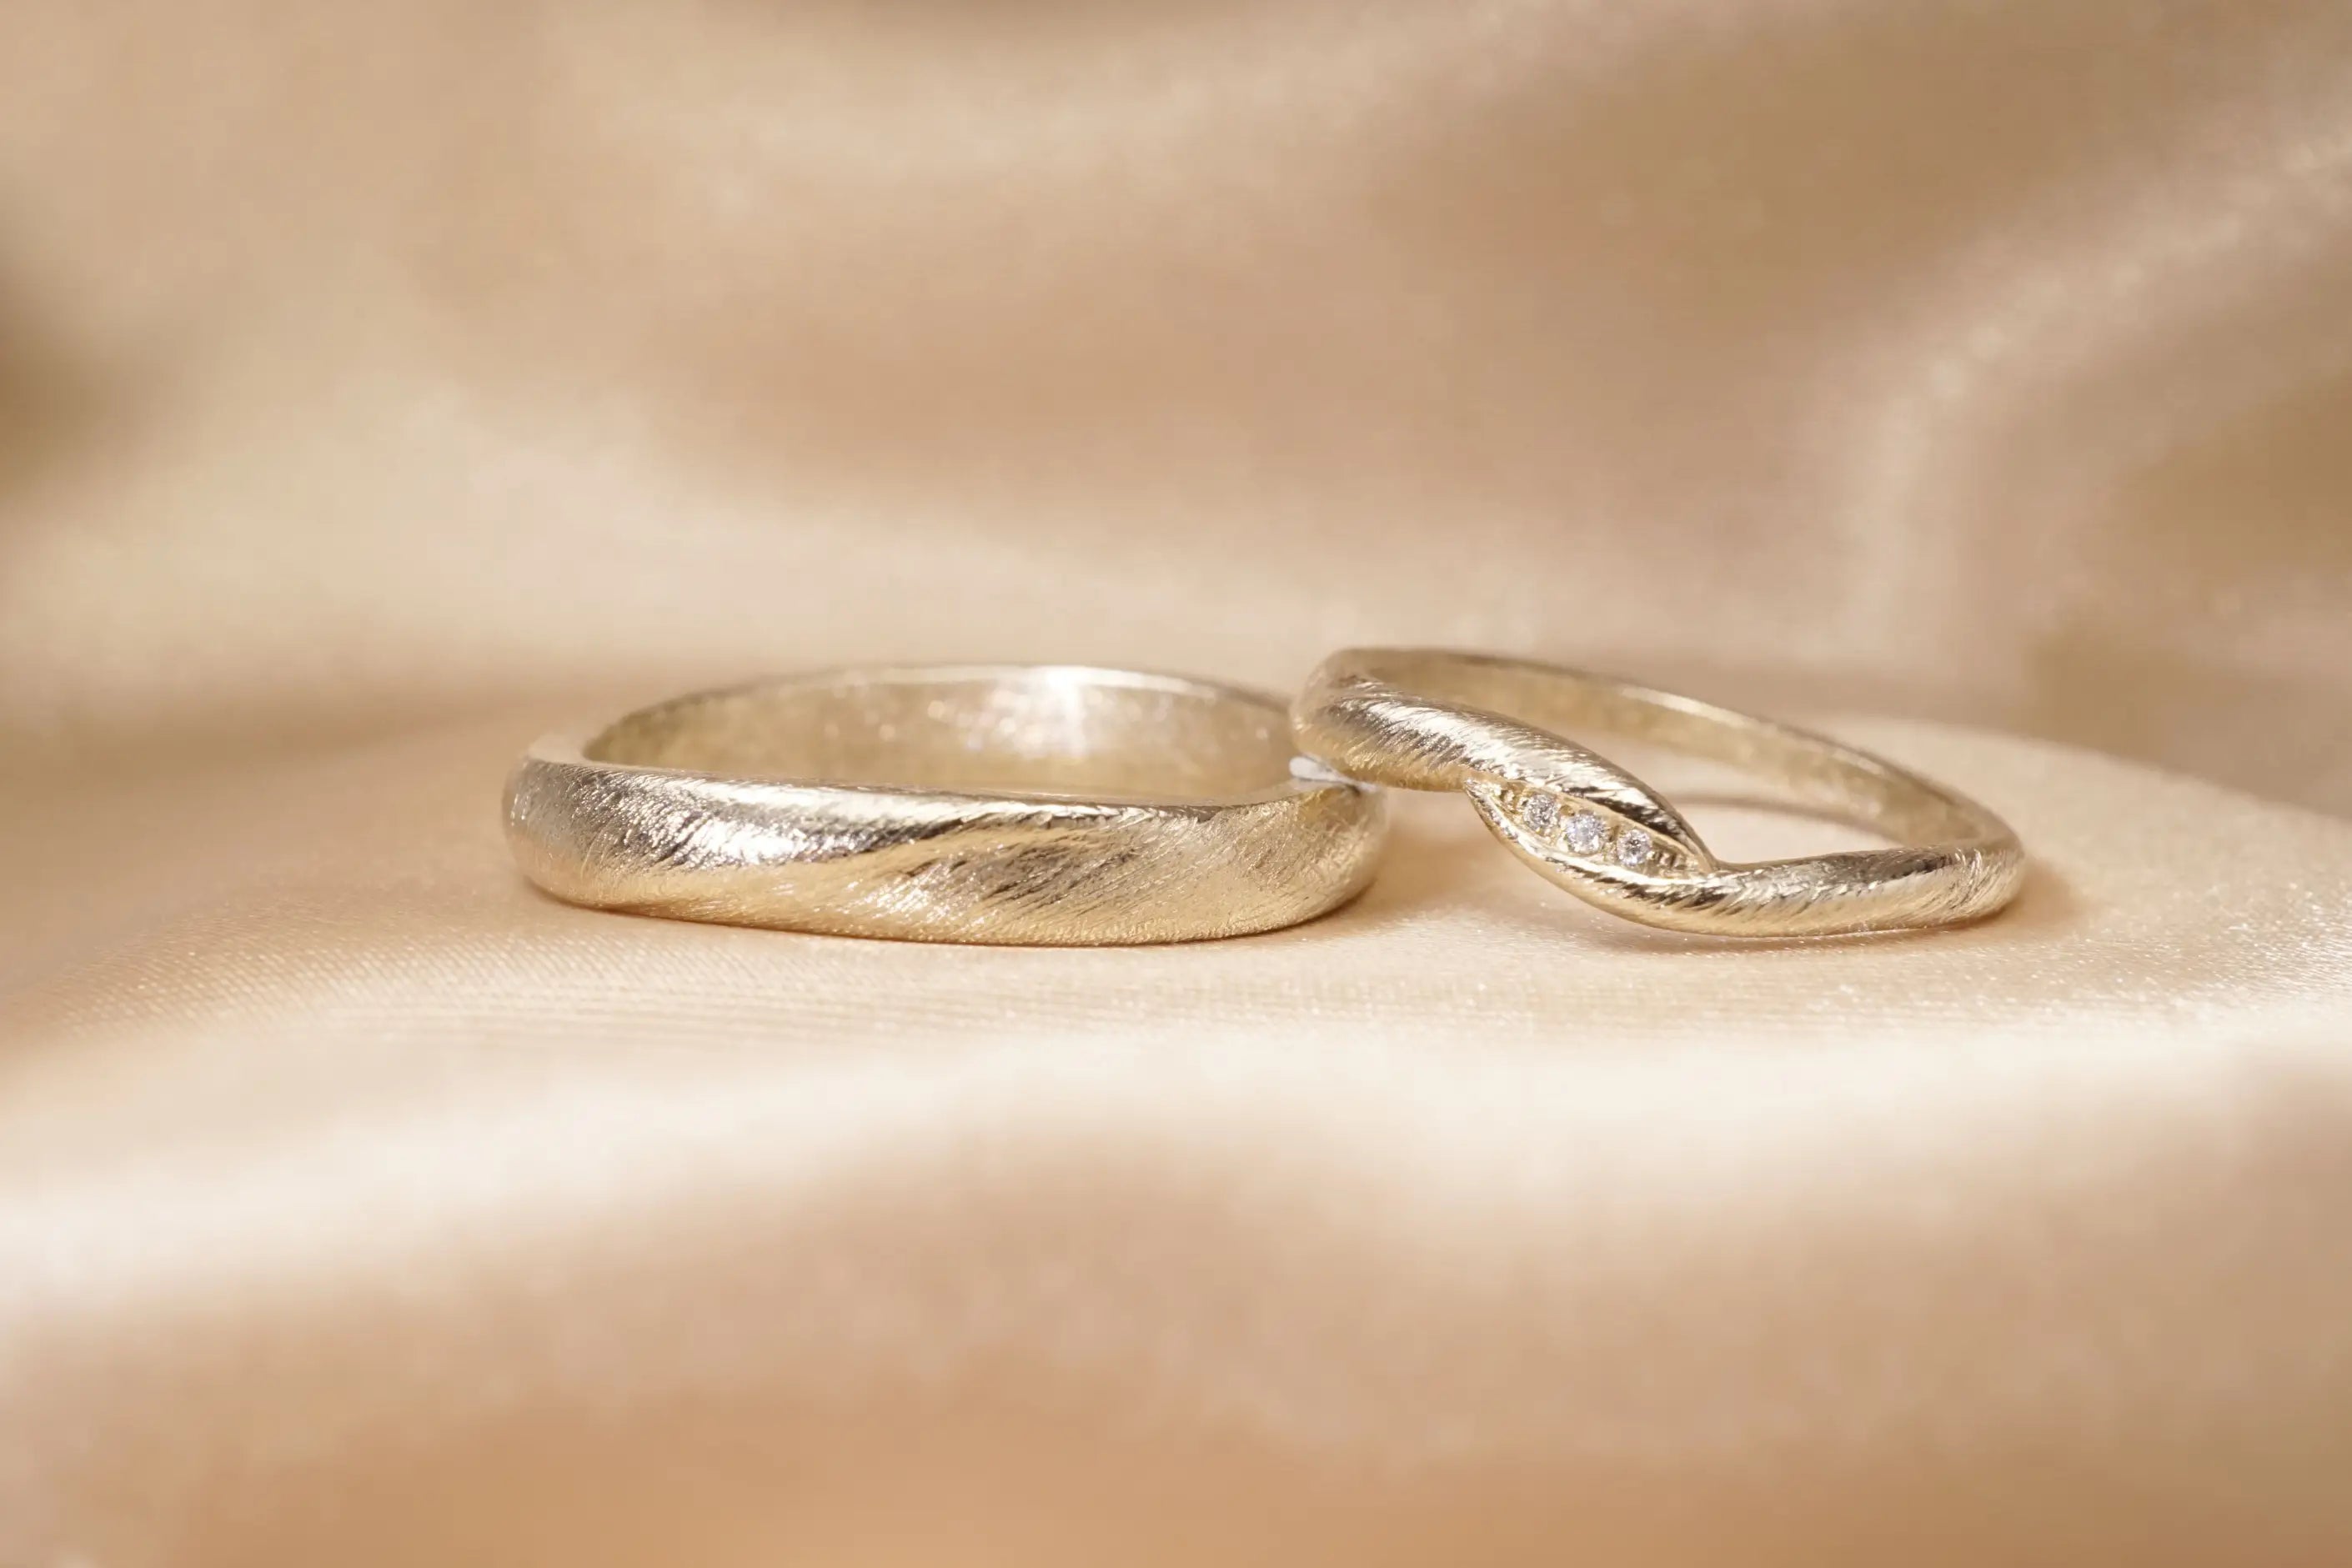 Chia_Jewelry_custom_wedding_rings_unique_design_with_14kt_gold_and_diamonds._Inspired_by_Harmonizing-13.webp